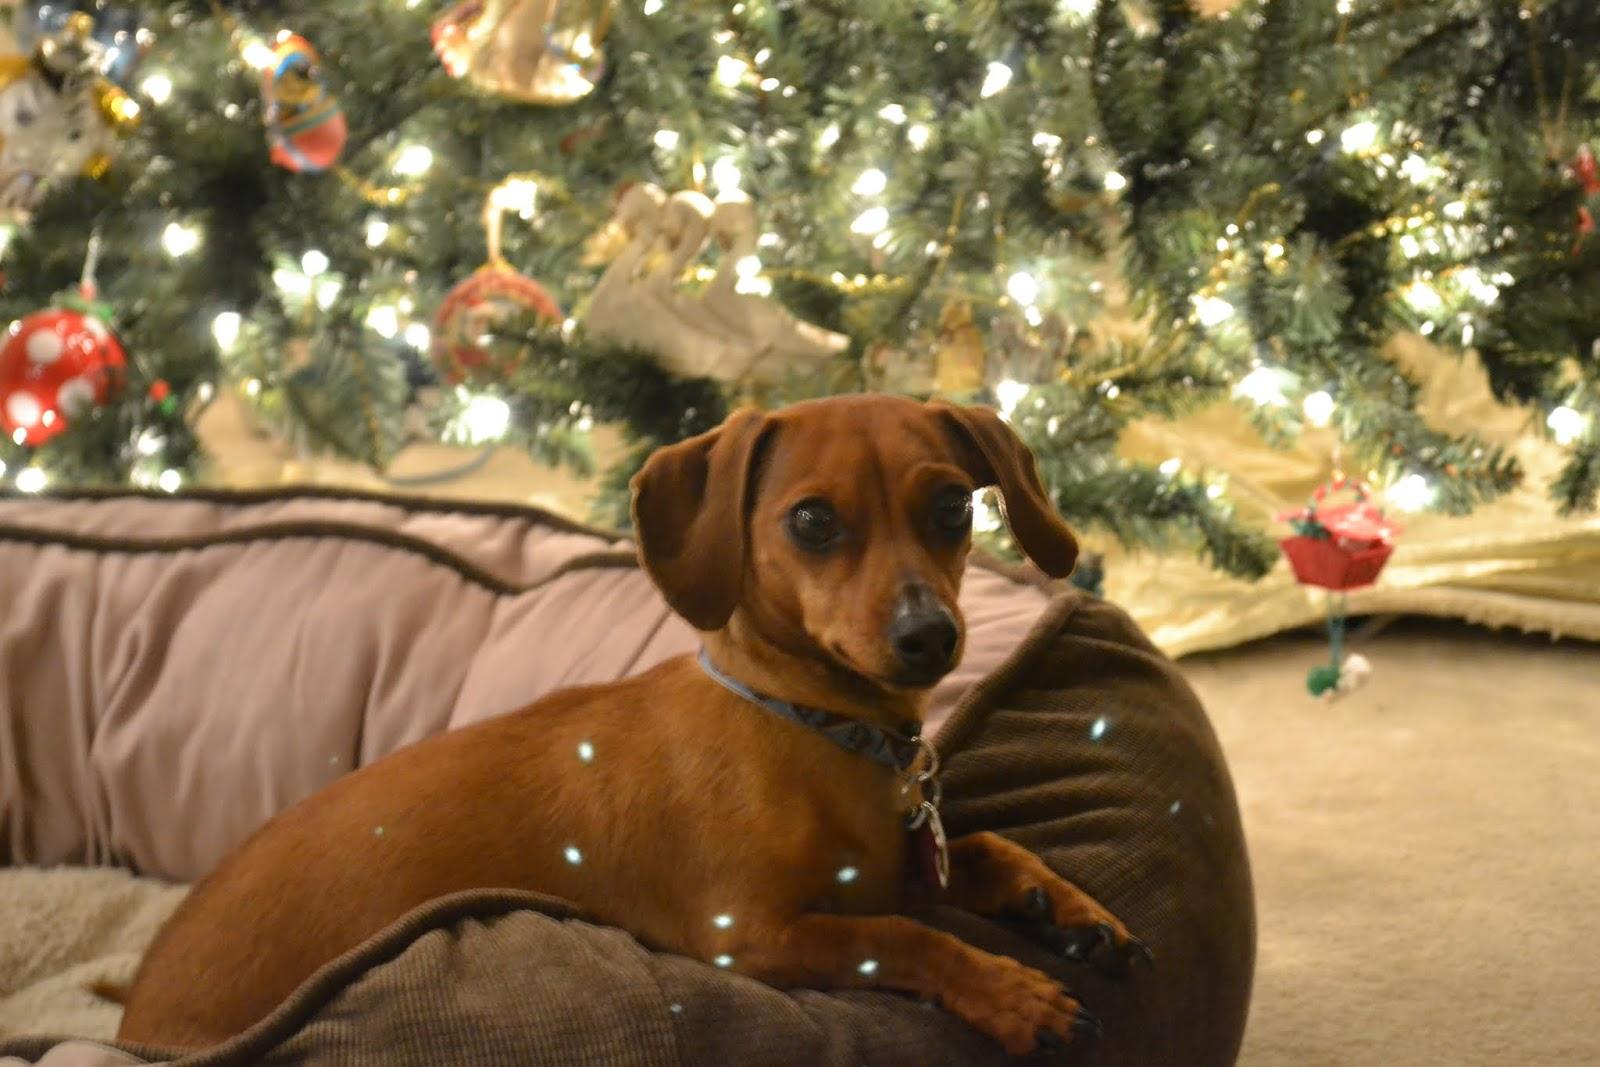 Dachshund at the Christmas tree photo and wallpaper